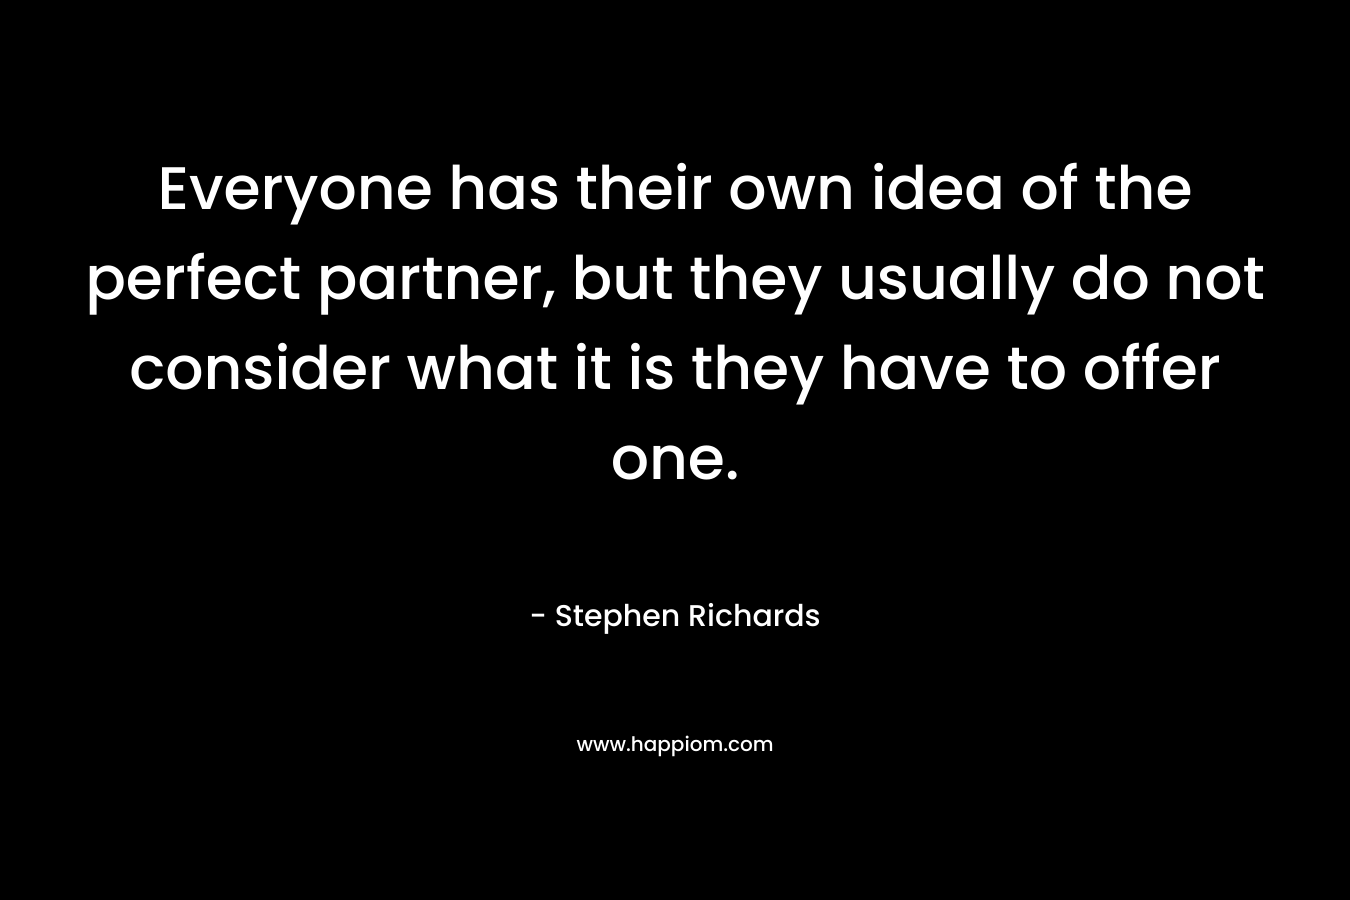 Everyone has their own idea of the perfect partner, but they usually do not consider what it is they have to offer one.